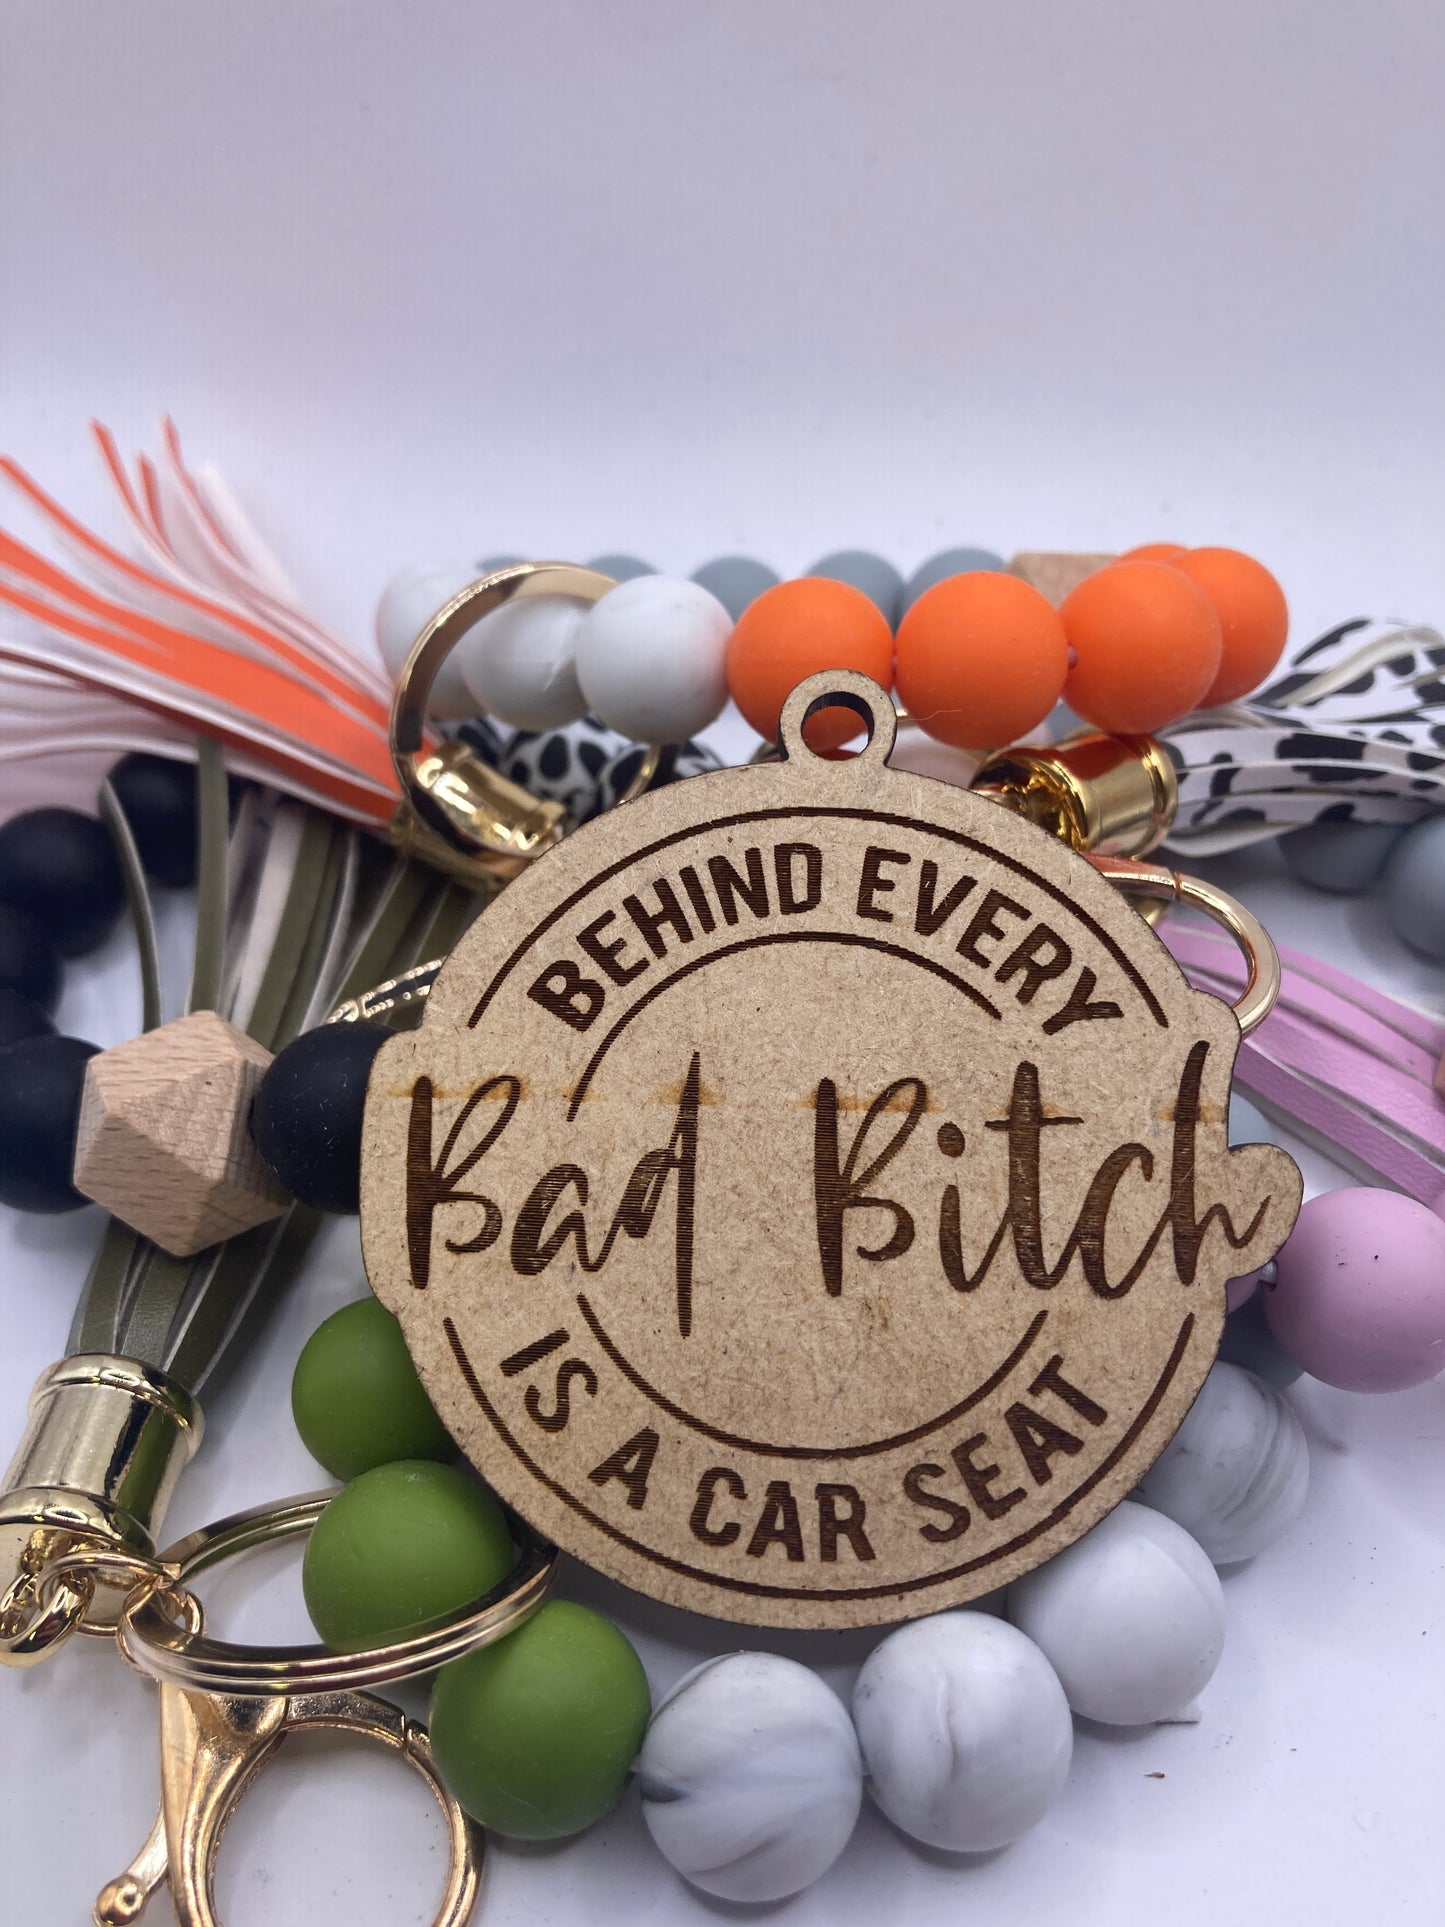 Behind Every Bad Bitch is a Car Seat Round Accessory Token